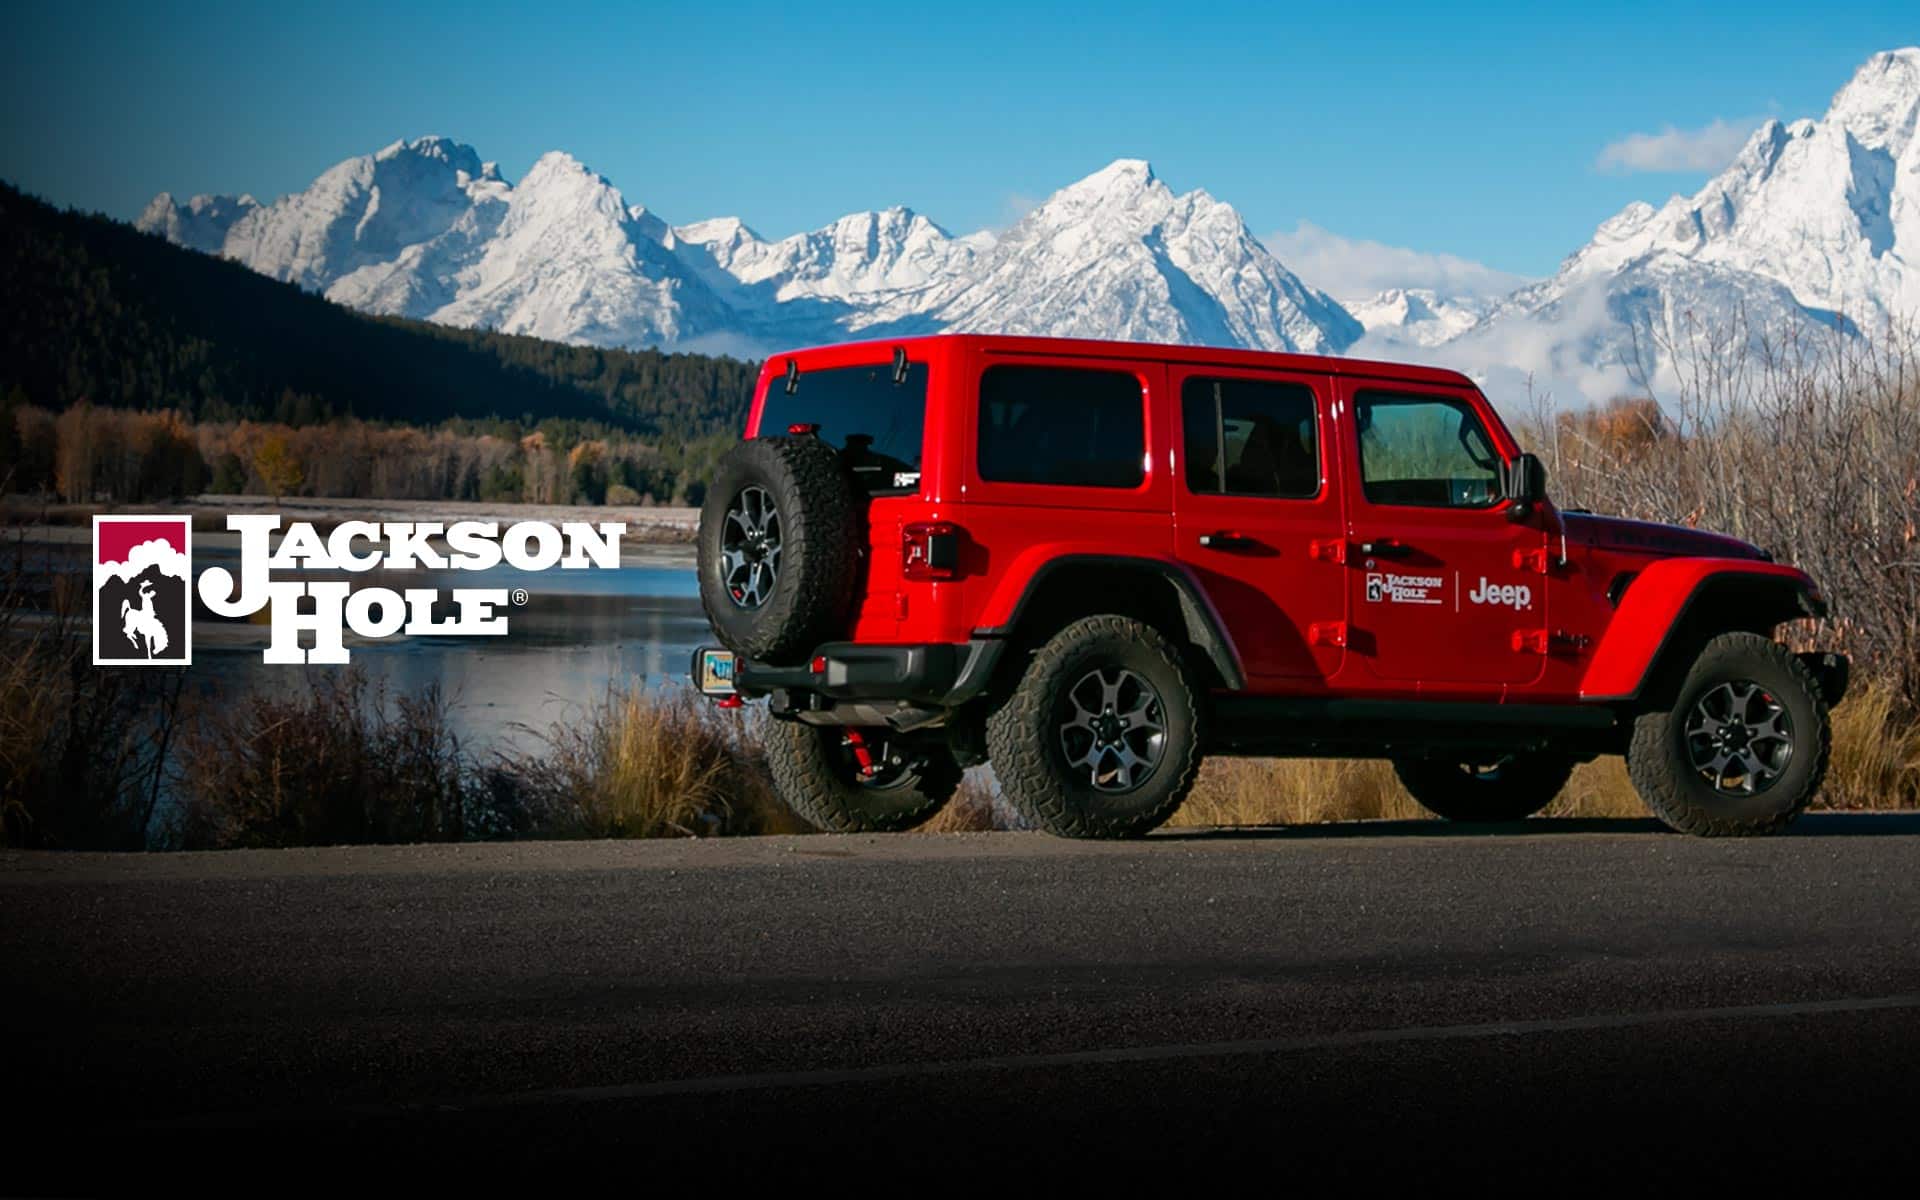 A profile of a red Jeep Wrangler Rubicon with Jackson Hole logo on the passenger-side door, parked beside a lake, with mountains in the background. Jackson Hole.